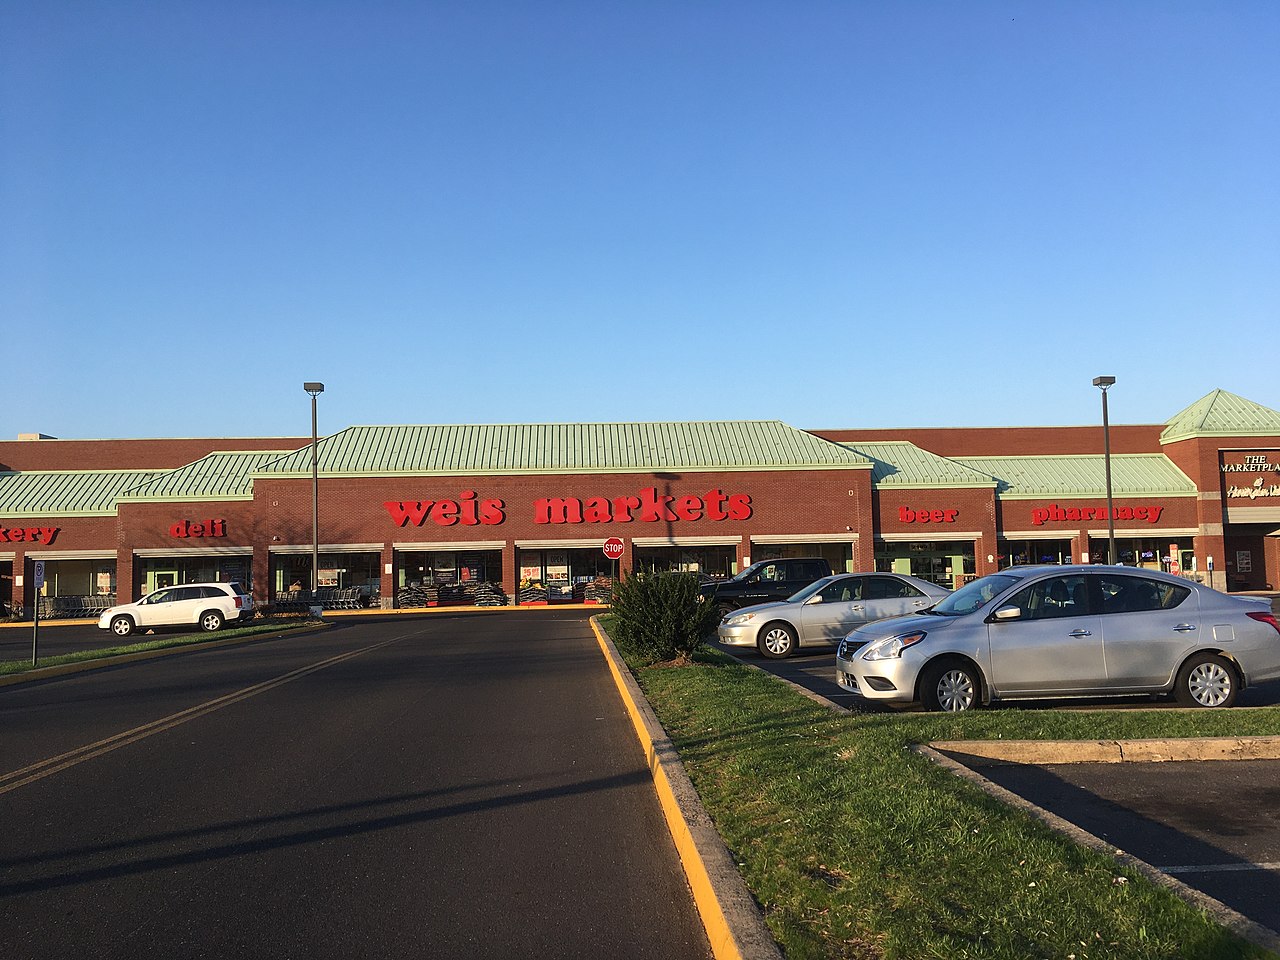 Weis Markets' Net Sales, Comparable Store Sales Rise in Q2